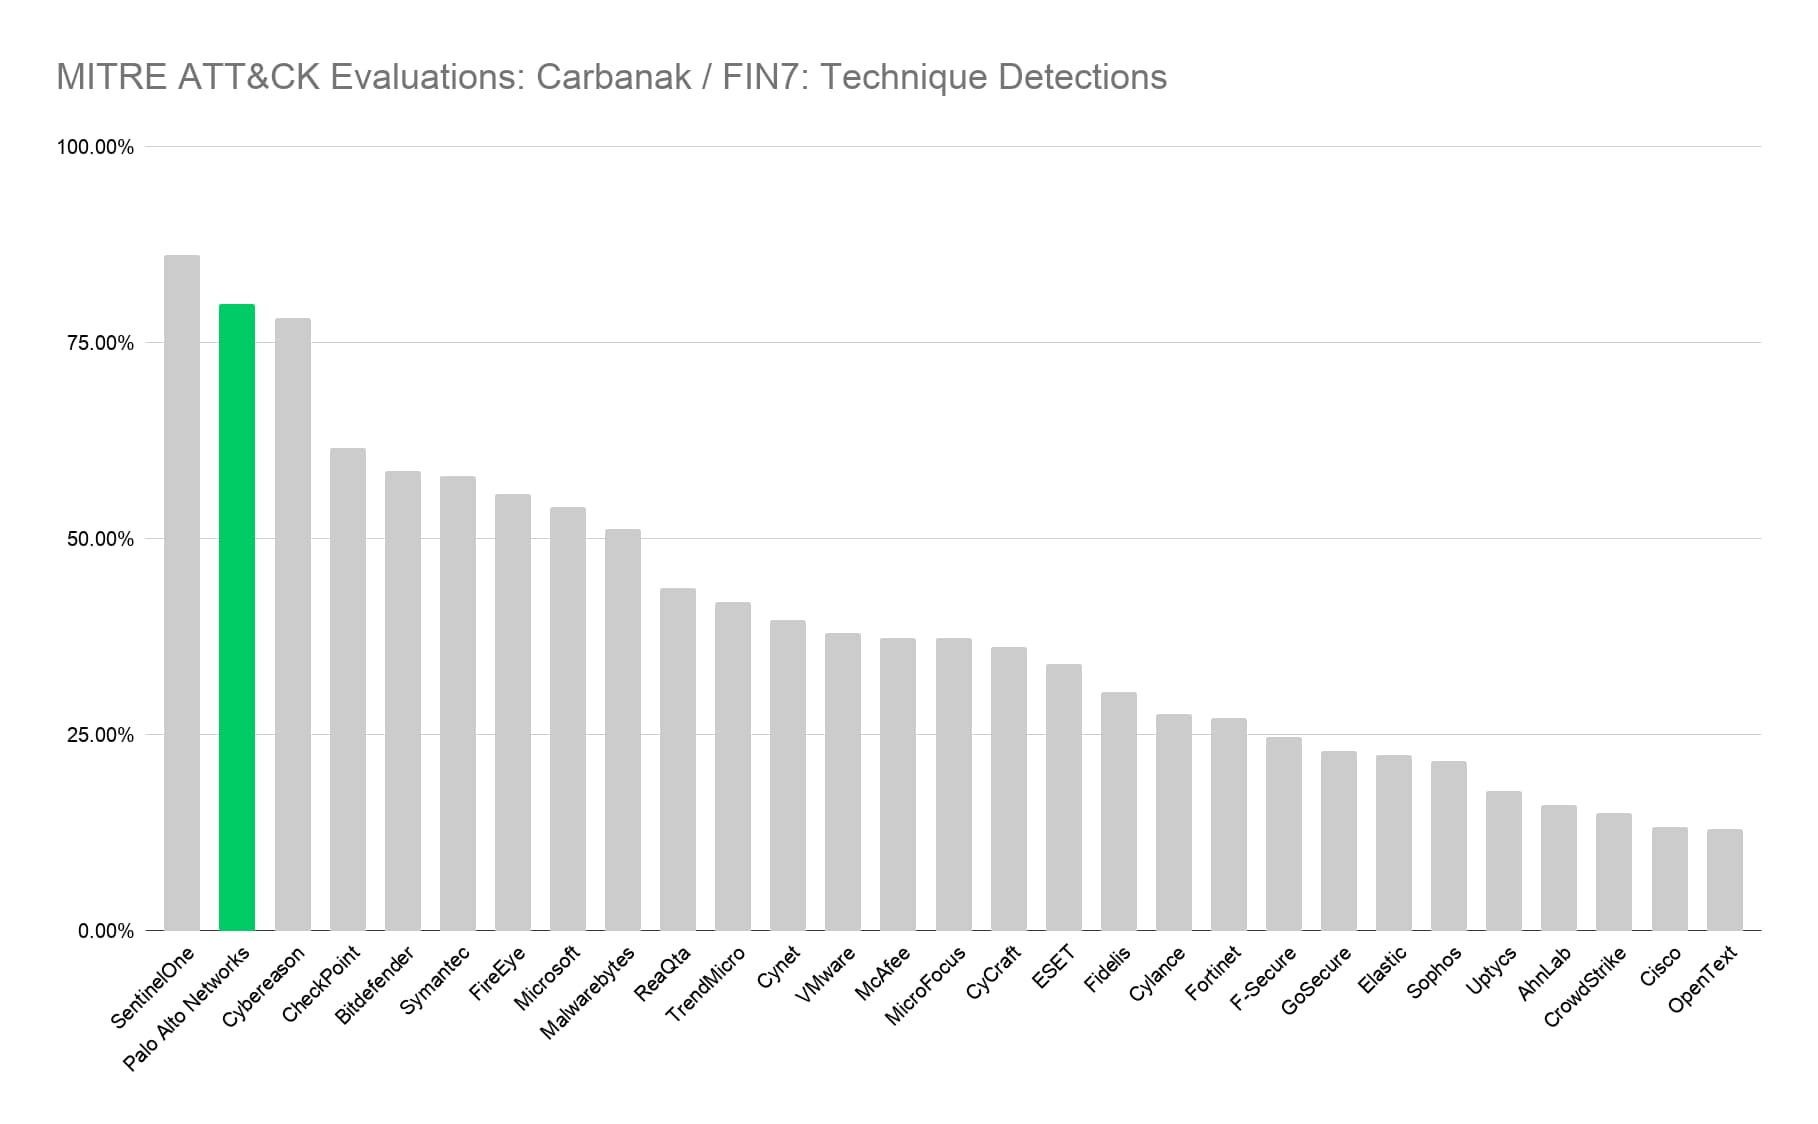 Figure 4. 80% of attacks identified with the highest possible technique-level detection score.